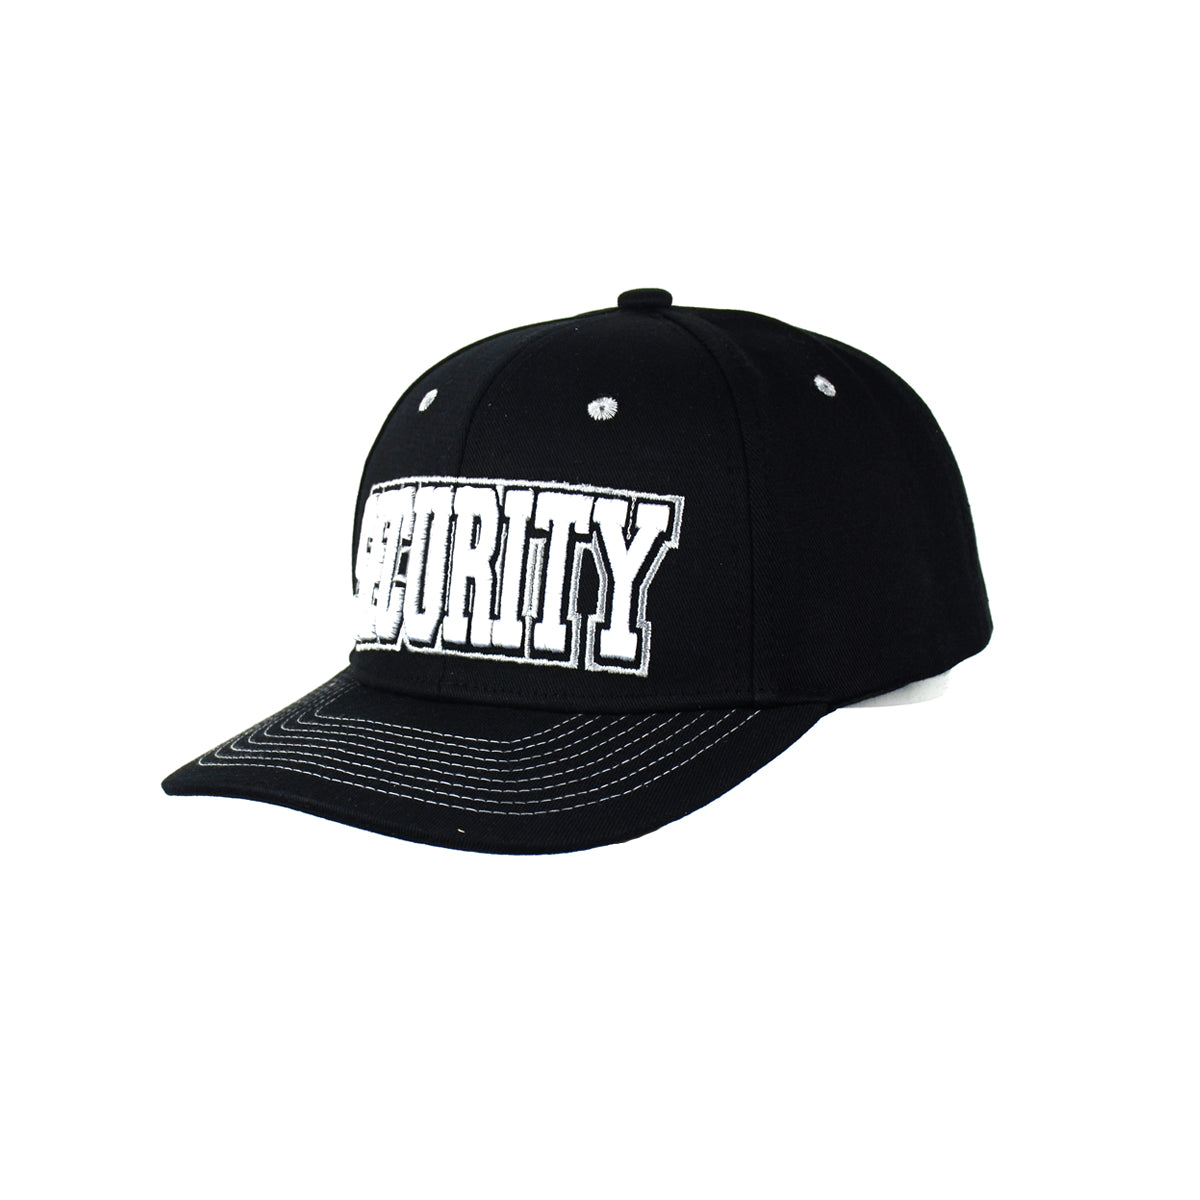 Snapback "Security" Hat Embroidered